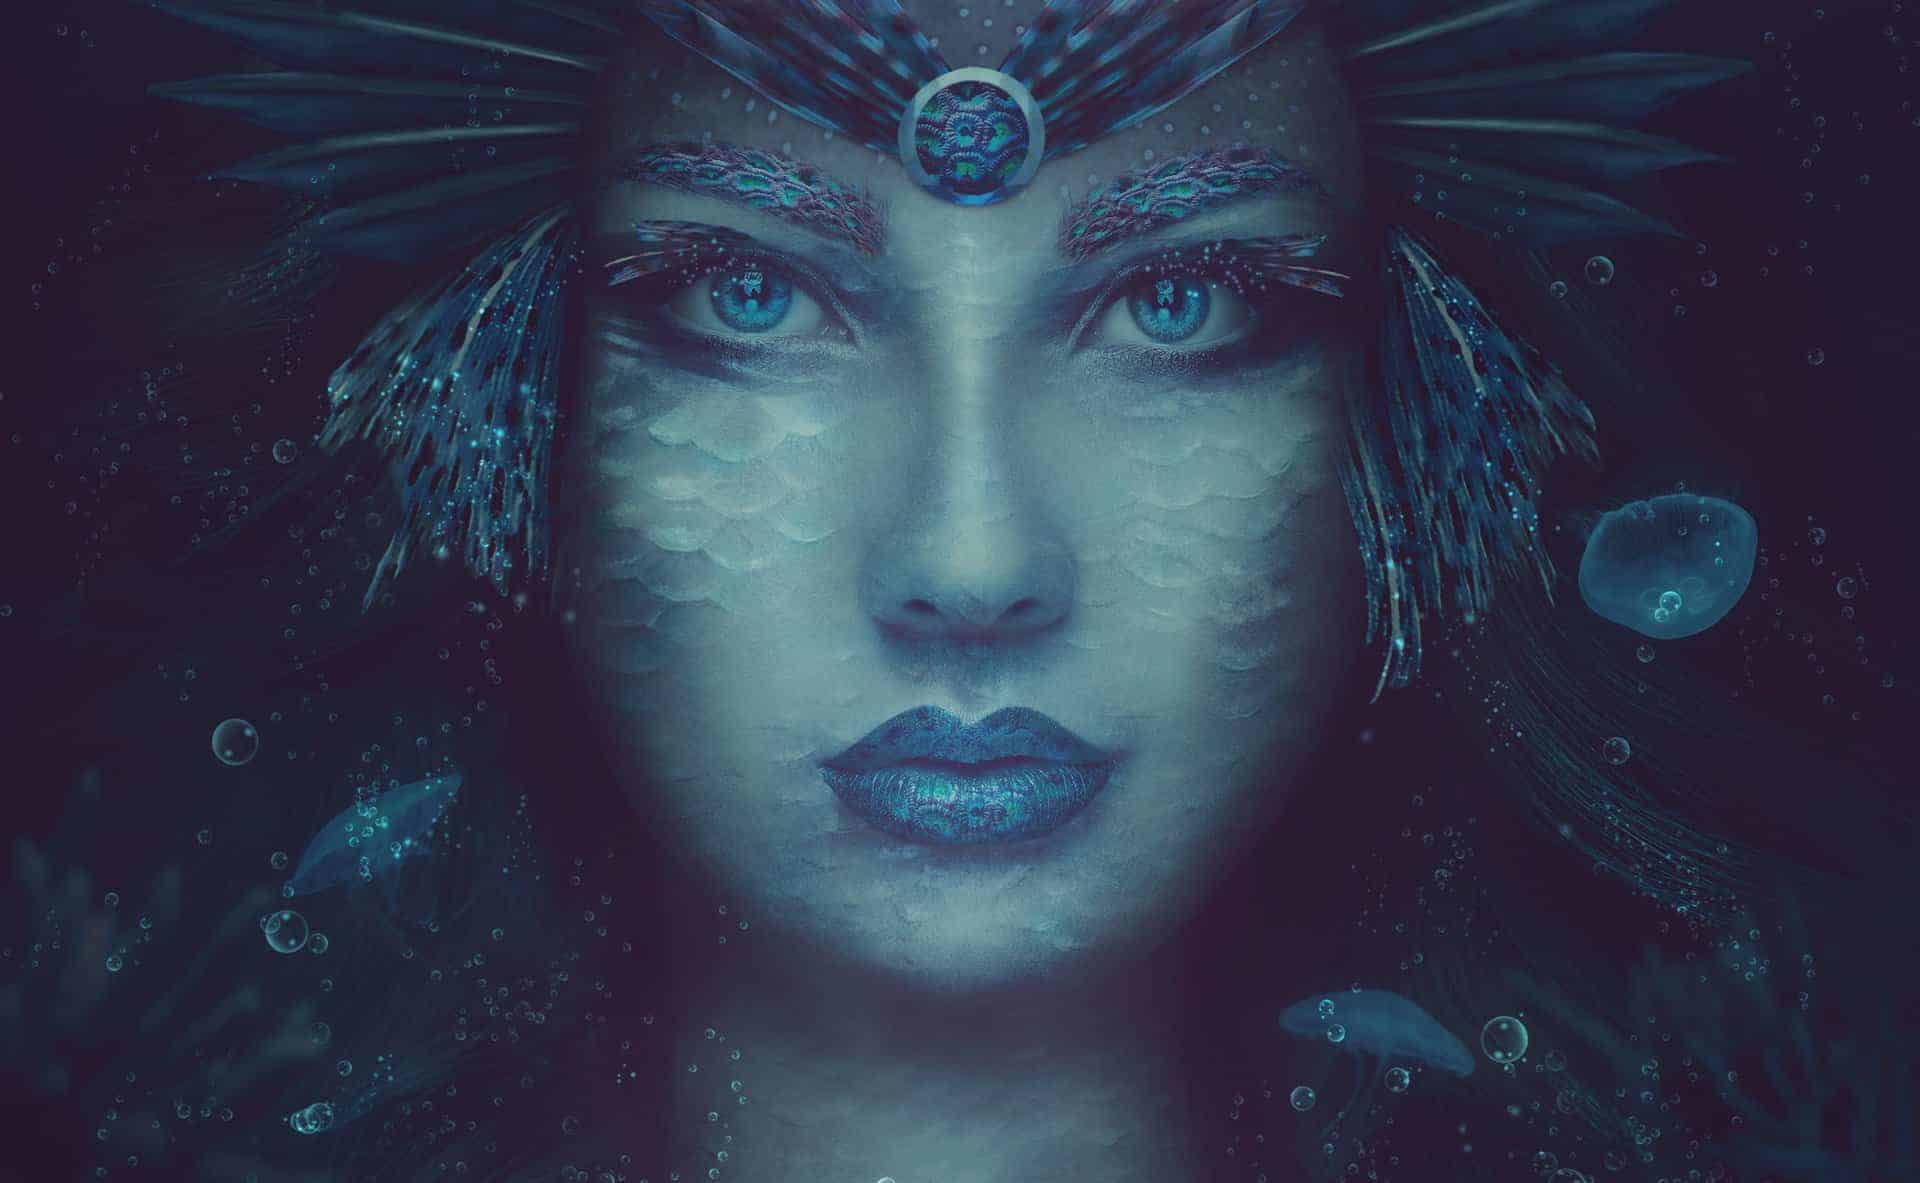 How to Create a Fantasy Sea Woman Portrait Photo Manipulation with Adobe Photoshop